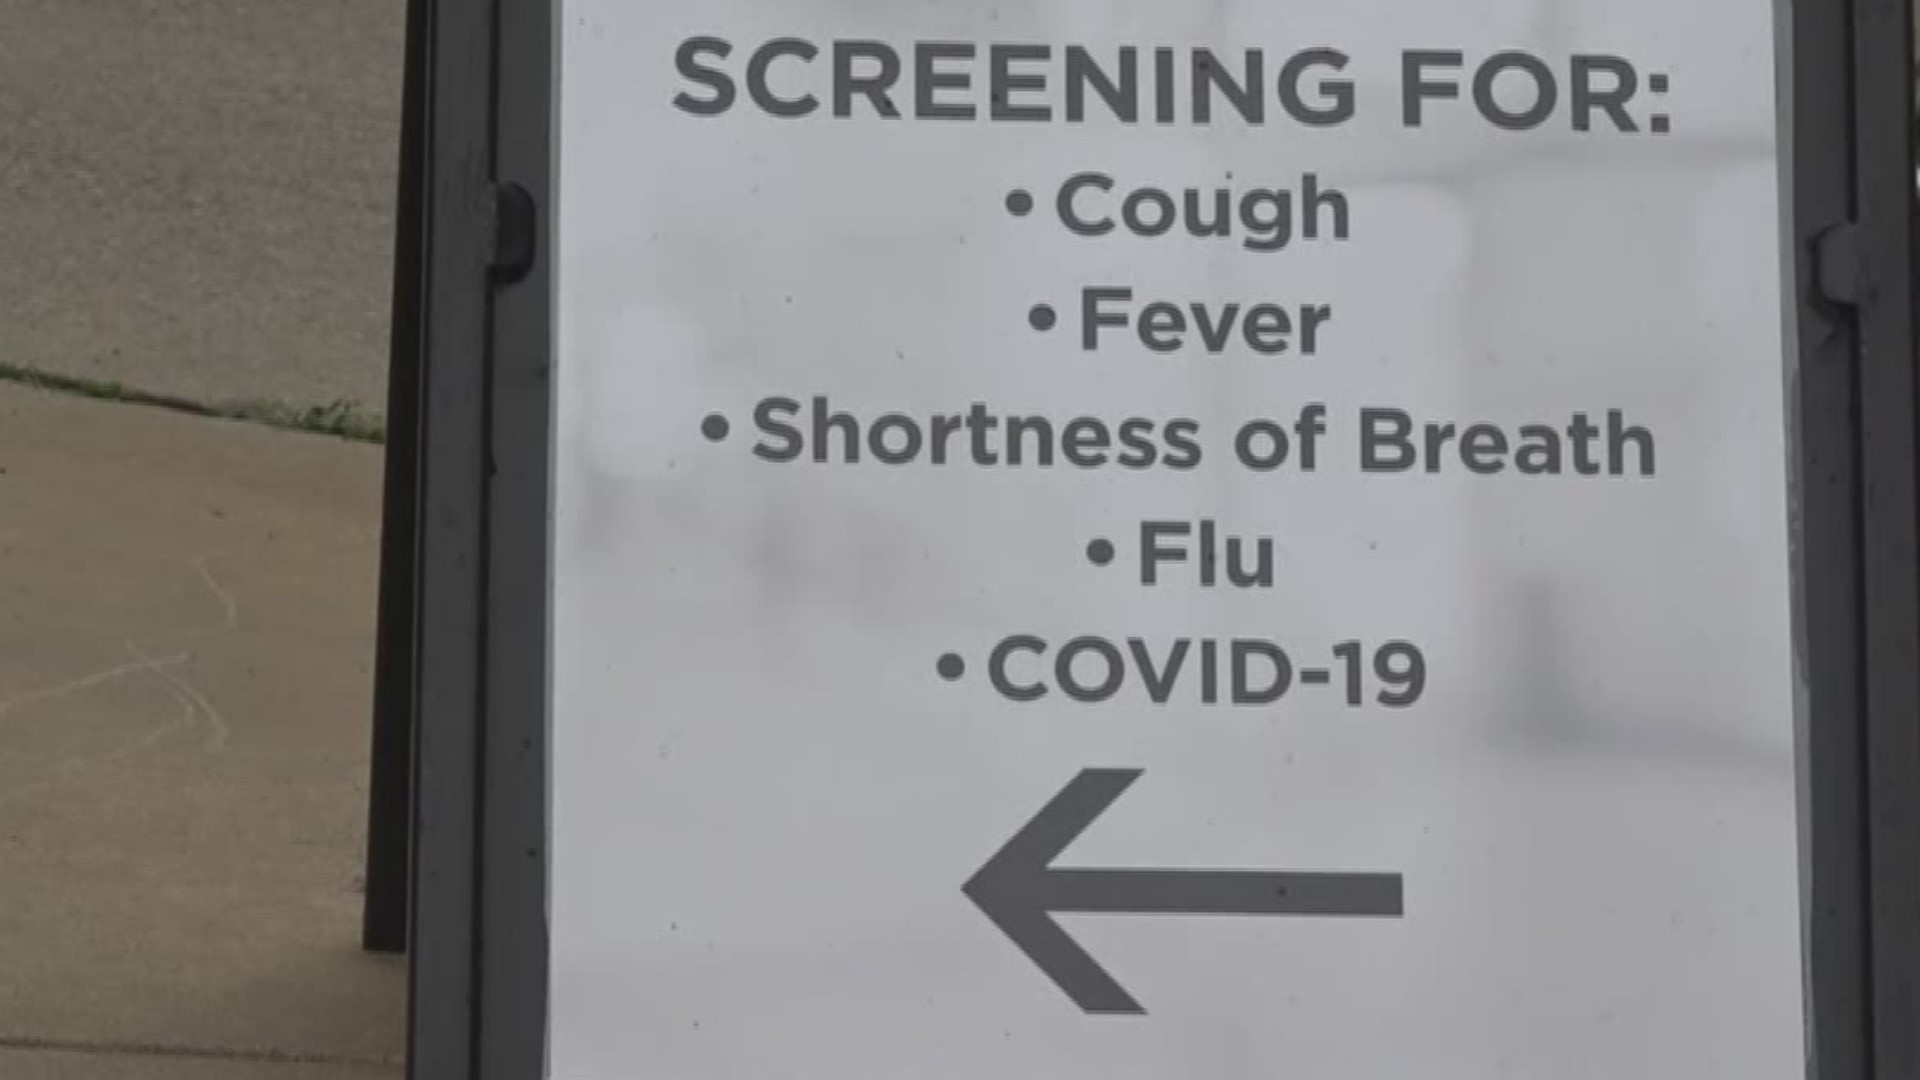 Driving into UAMS, you will see these signs everywhere leading you to the screening center.